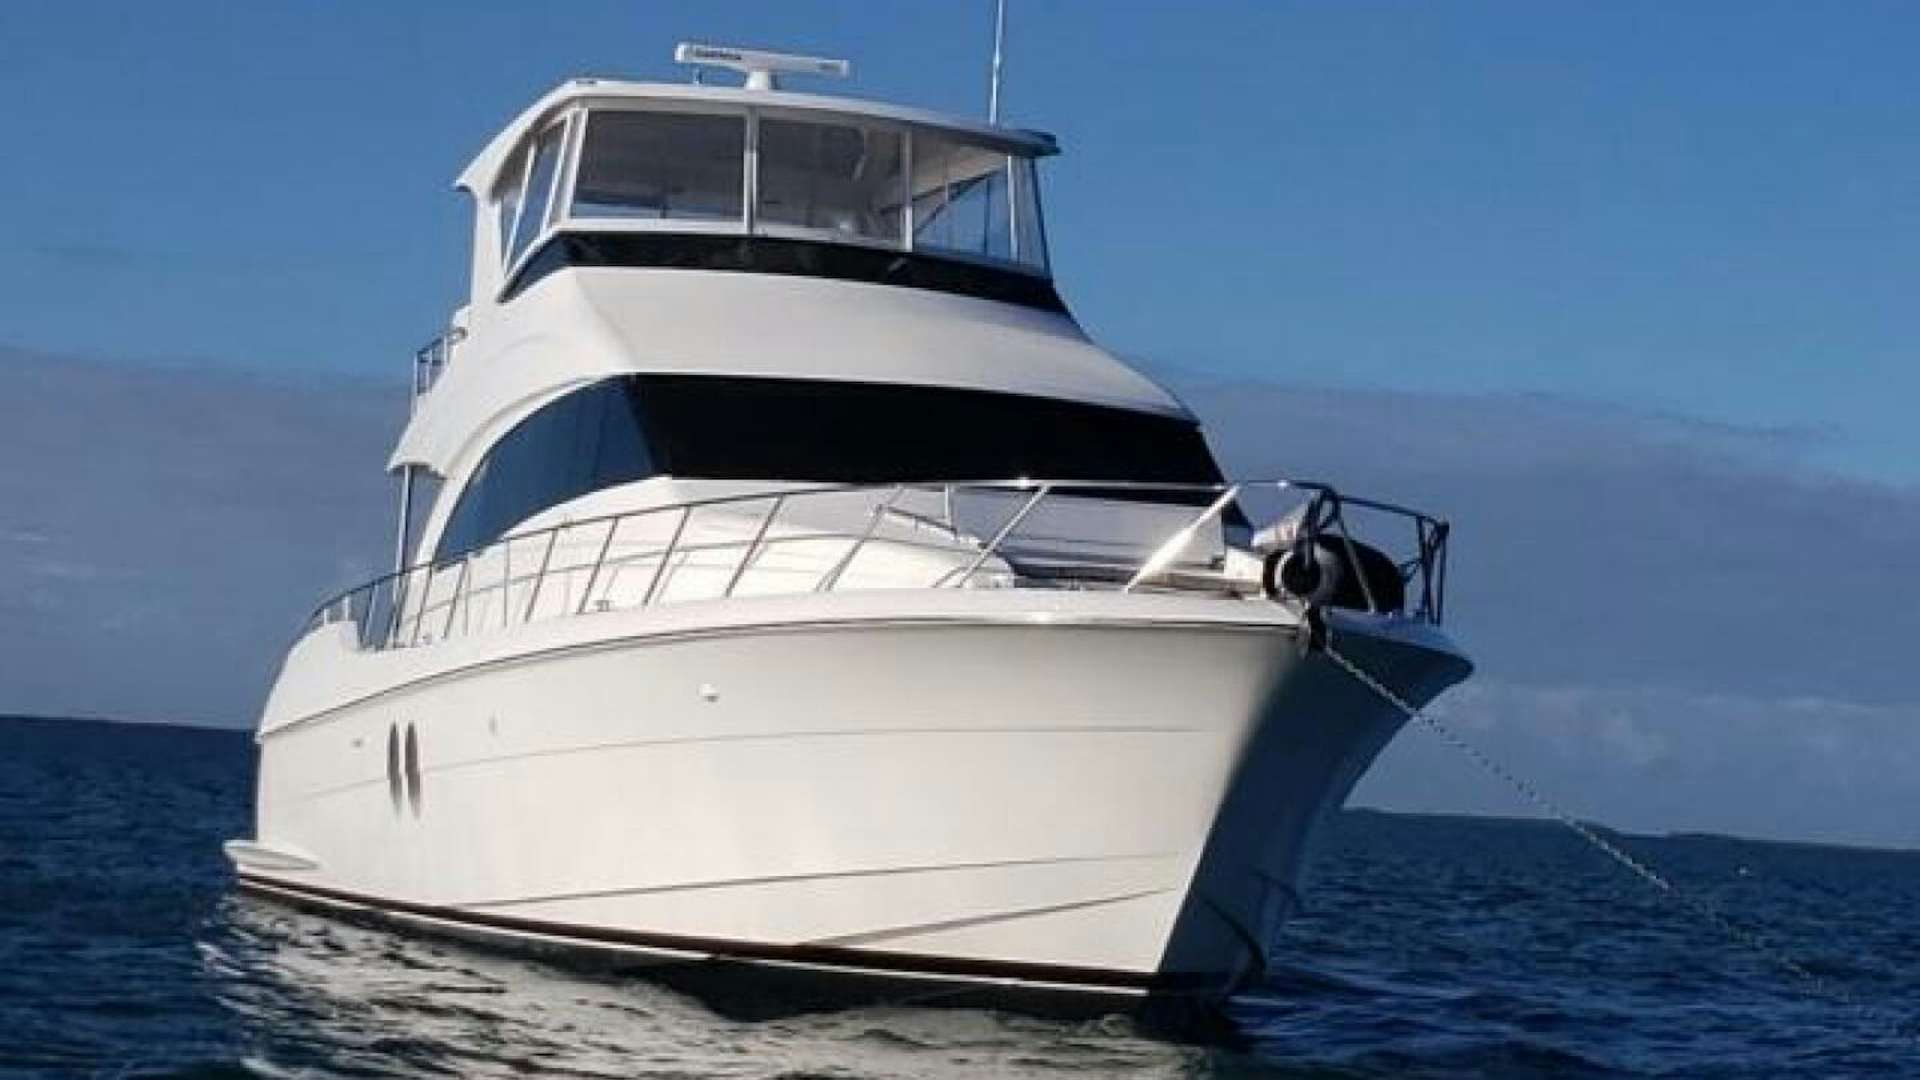 60my417
Yacht for Sale